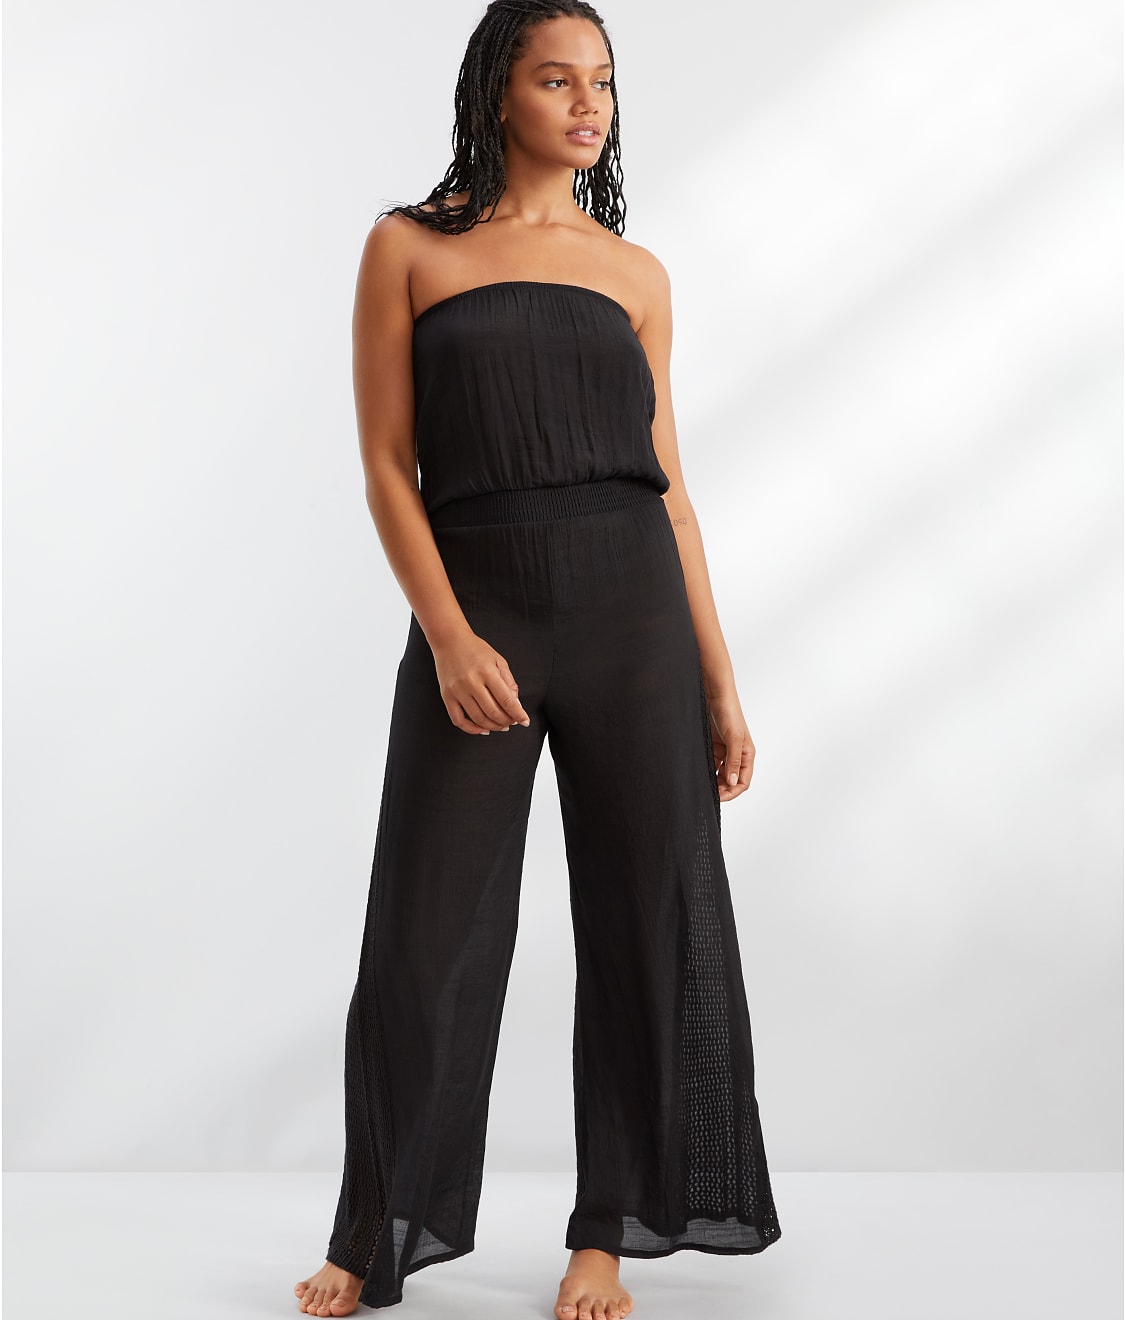 Elan: Strapless Jumpsuit Cover-Up CR7310